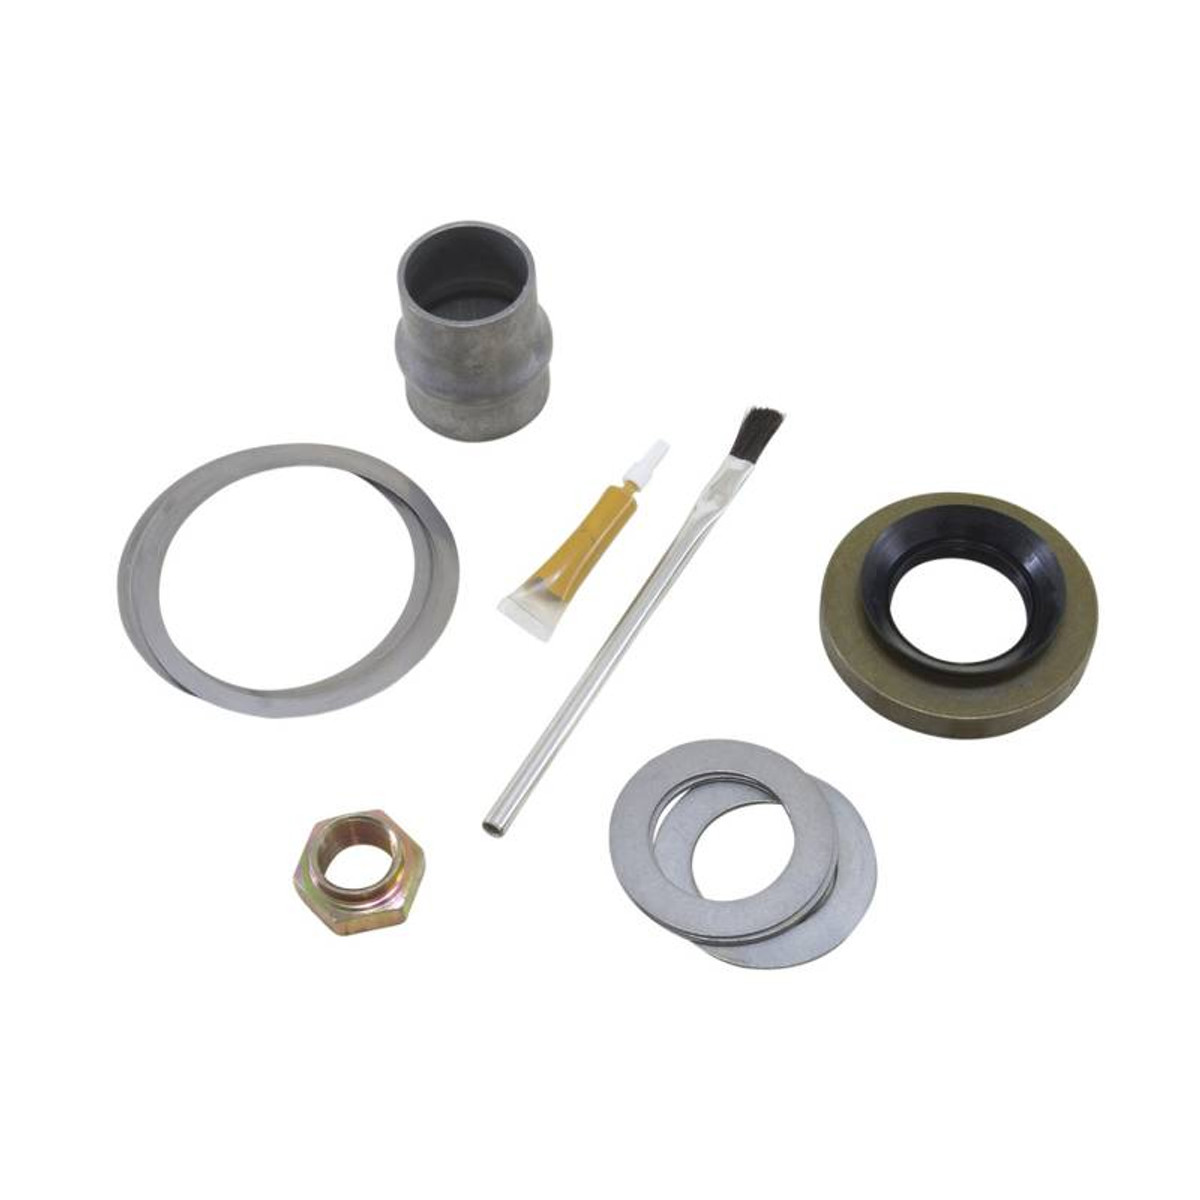 Yukon Minor Install Kit For Toyota 85 And Older Or Aftermarket 8 Inch MK T8-A